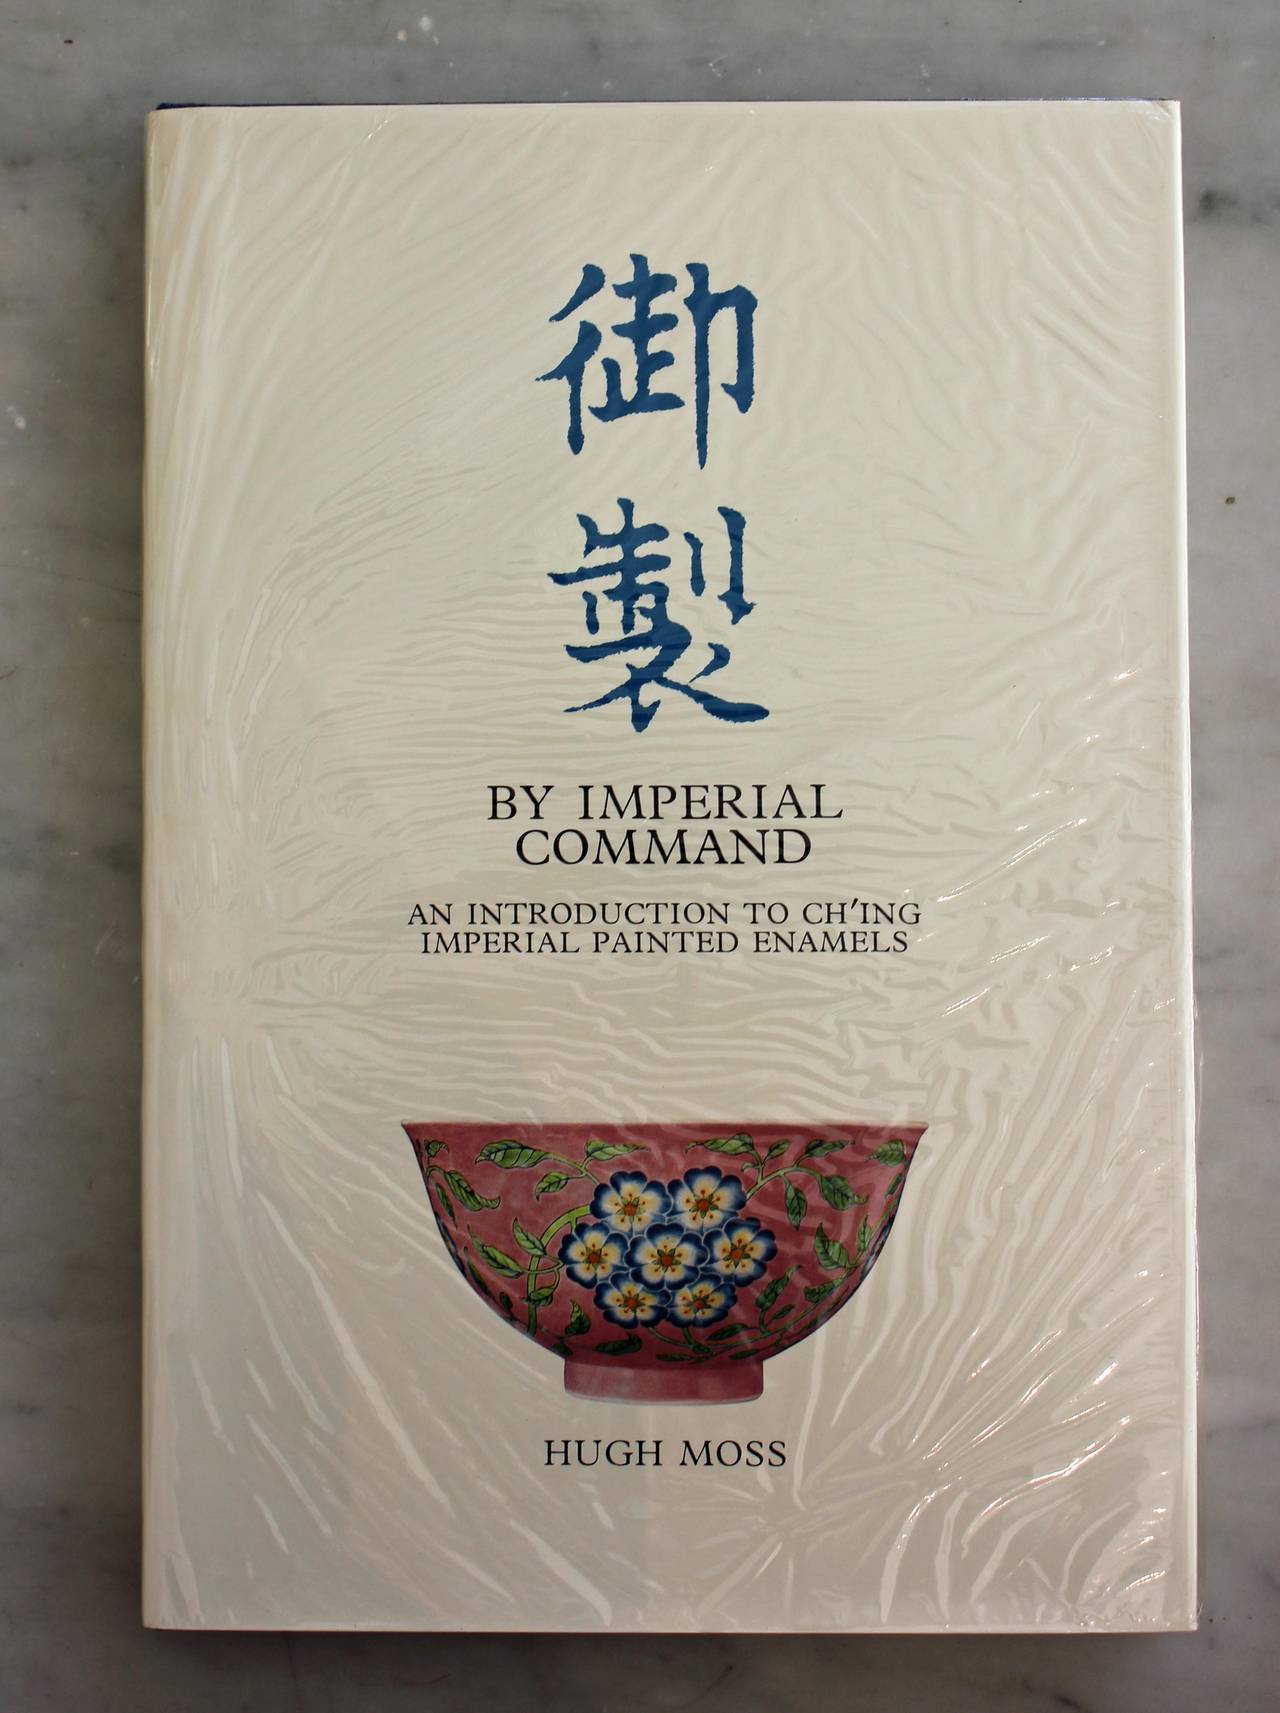 Moss, Hugh by Imperial Command an introduction to Ch'ing Imperial Painted Enamels. 

Hong Kong: Hibaya Company, Ltd.

Two volumes. 87 color photographic plates with 174 images depicting the front and back of each piece. 

Original cloth,